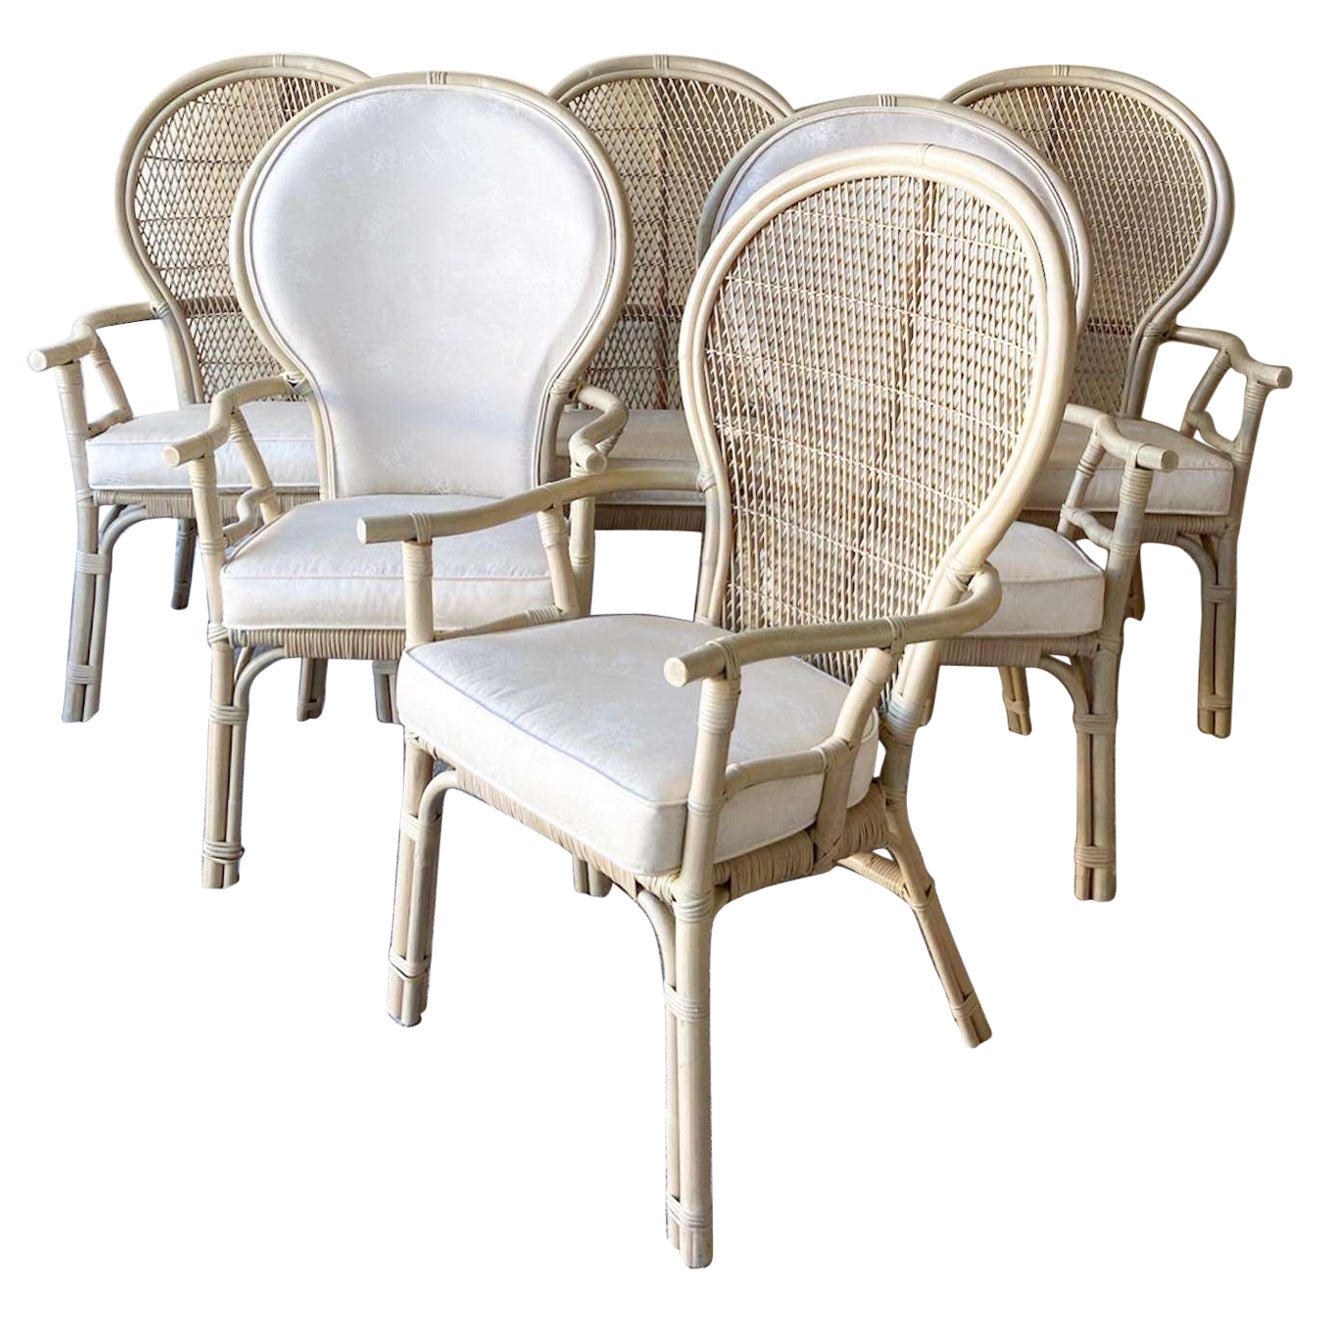 Boho Chic Balloon Back Bamboo Rattan Dining Chairs - Set of 6 For Sale